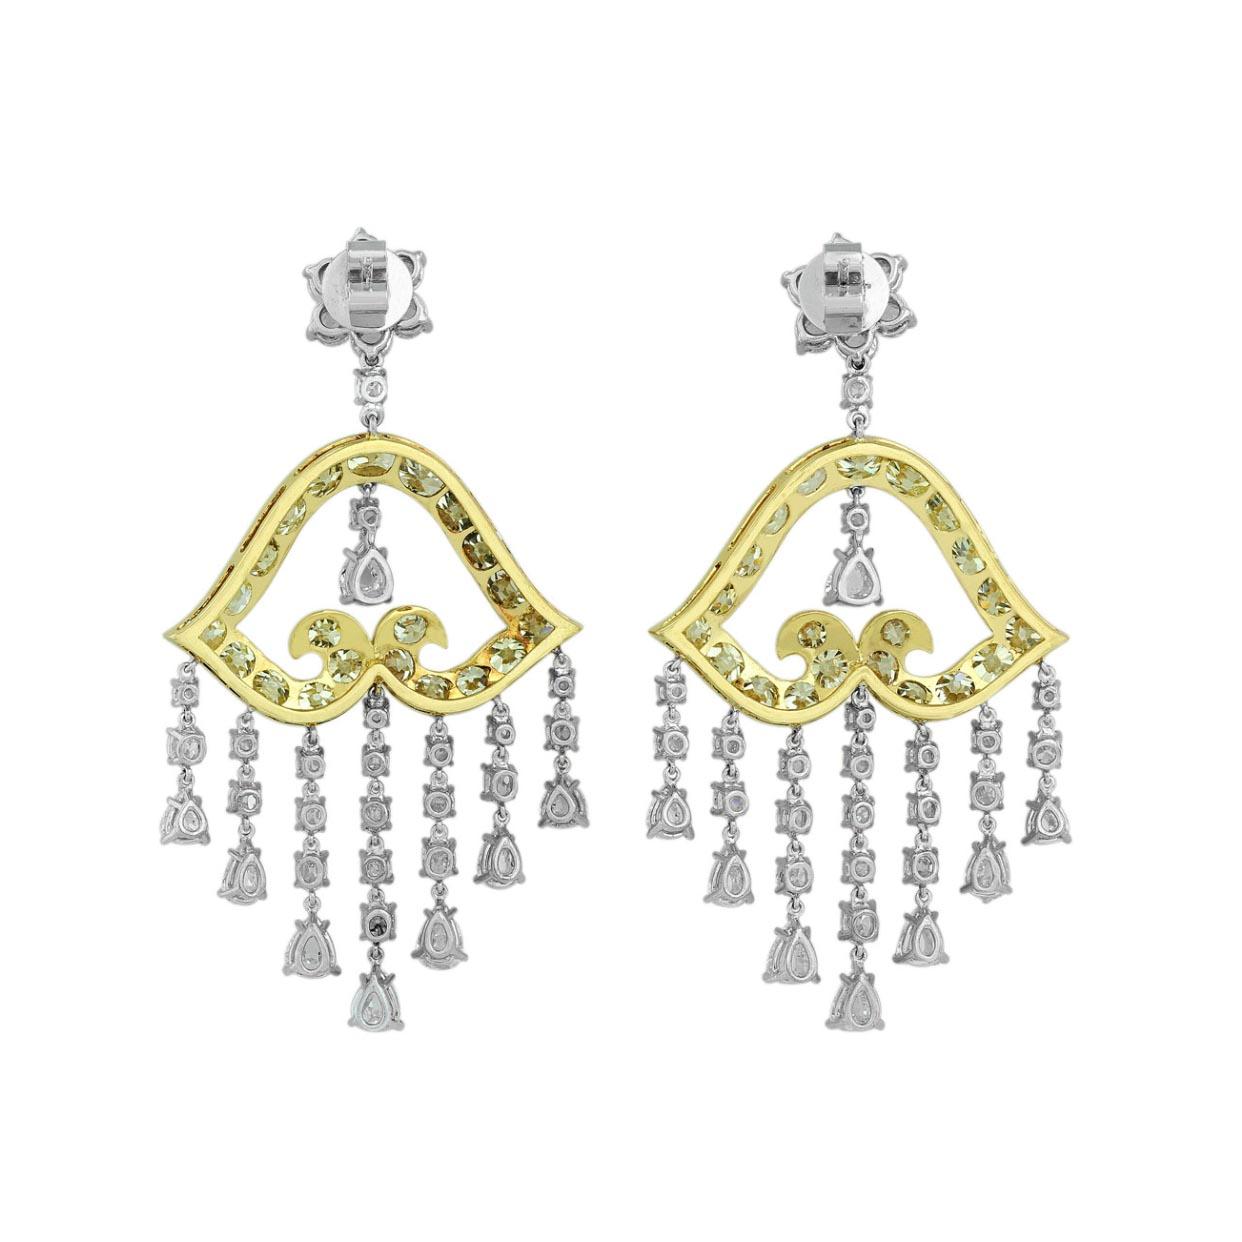 Impressive 27.90 carats of yellow diamond and white diamond chandelier earrings crafted in platinum and 18 karat yellow gold. The earrings have 13.89 carats of fancy yellow diamonds set in 18 karat yellow gold and 13.01 carats of white diamonds set